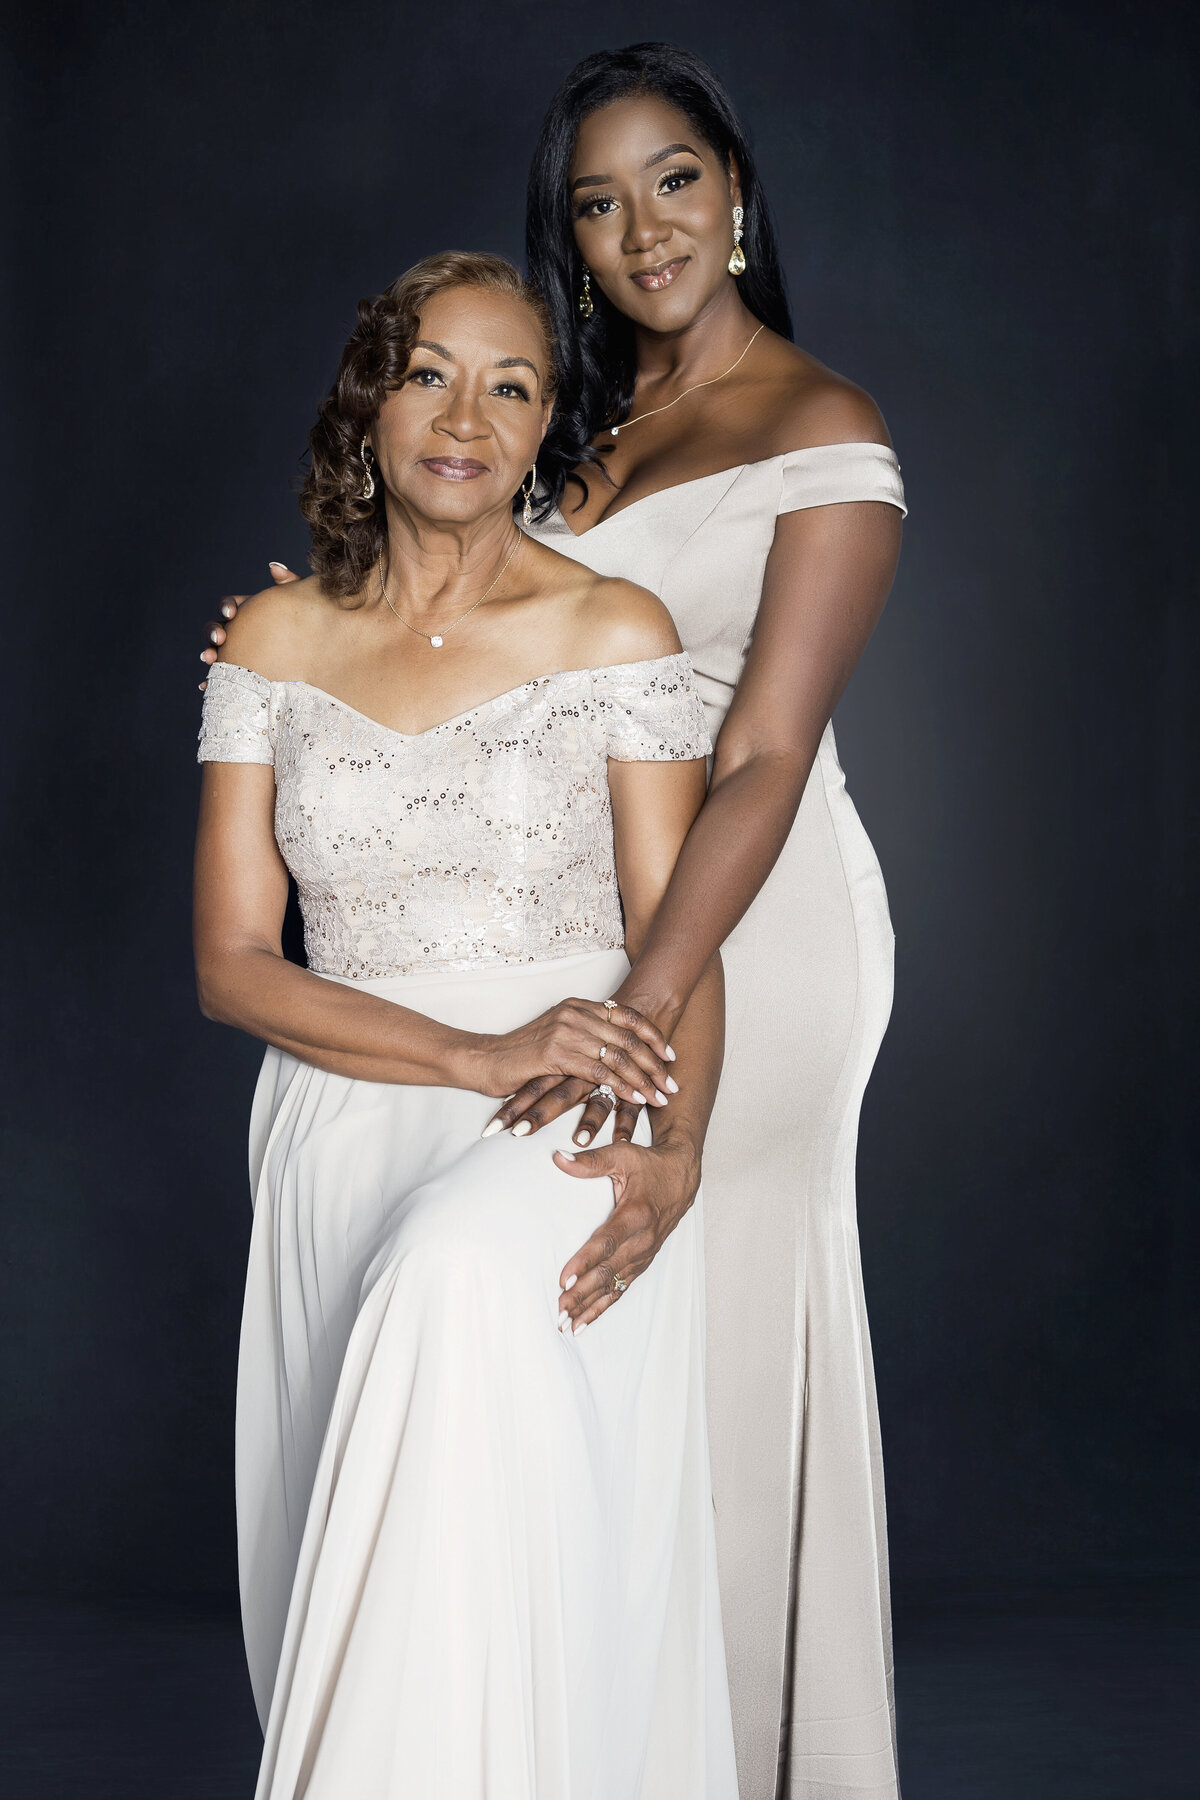 African American mother daughter portrait by Alyssa Benjamin of The Black Lady Project